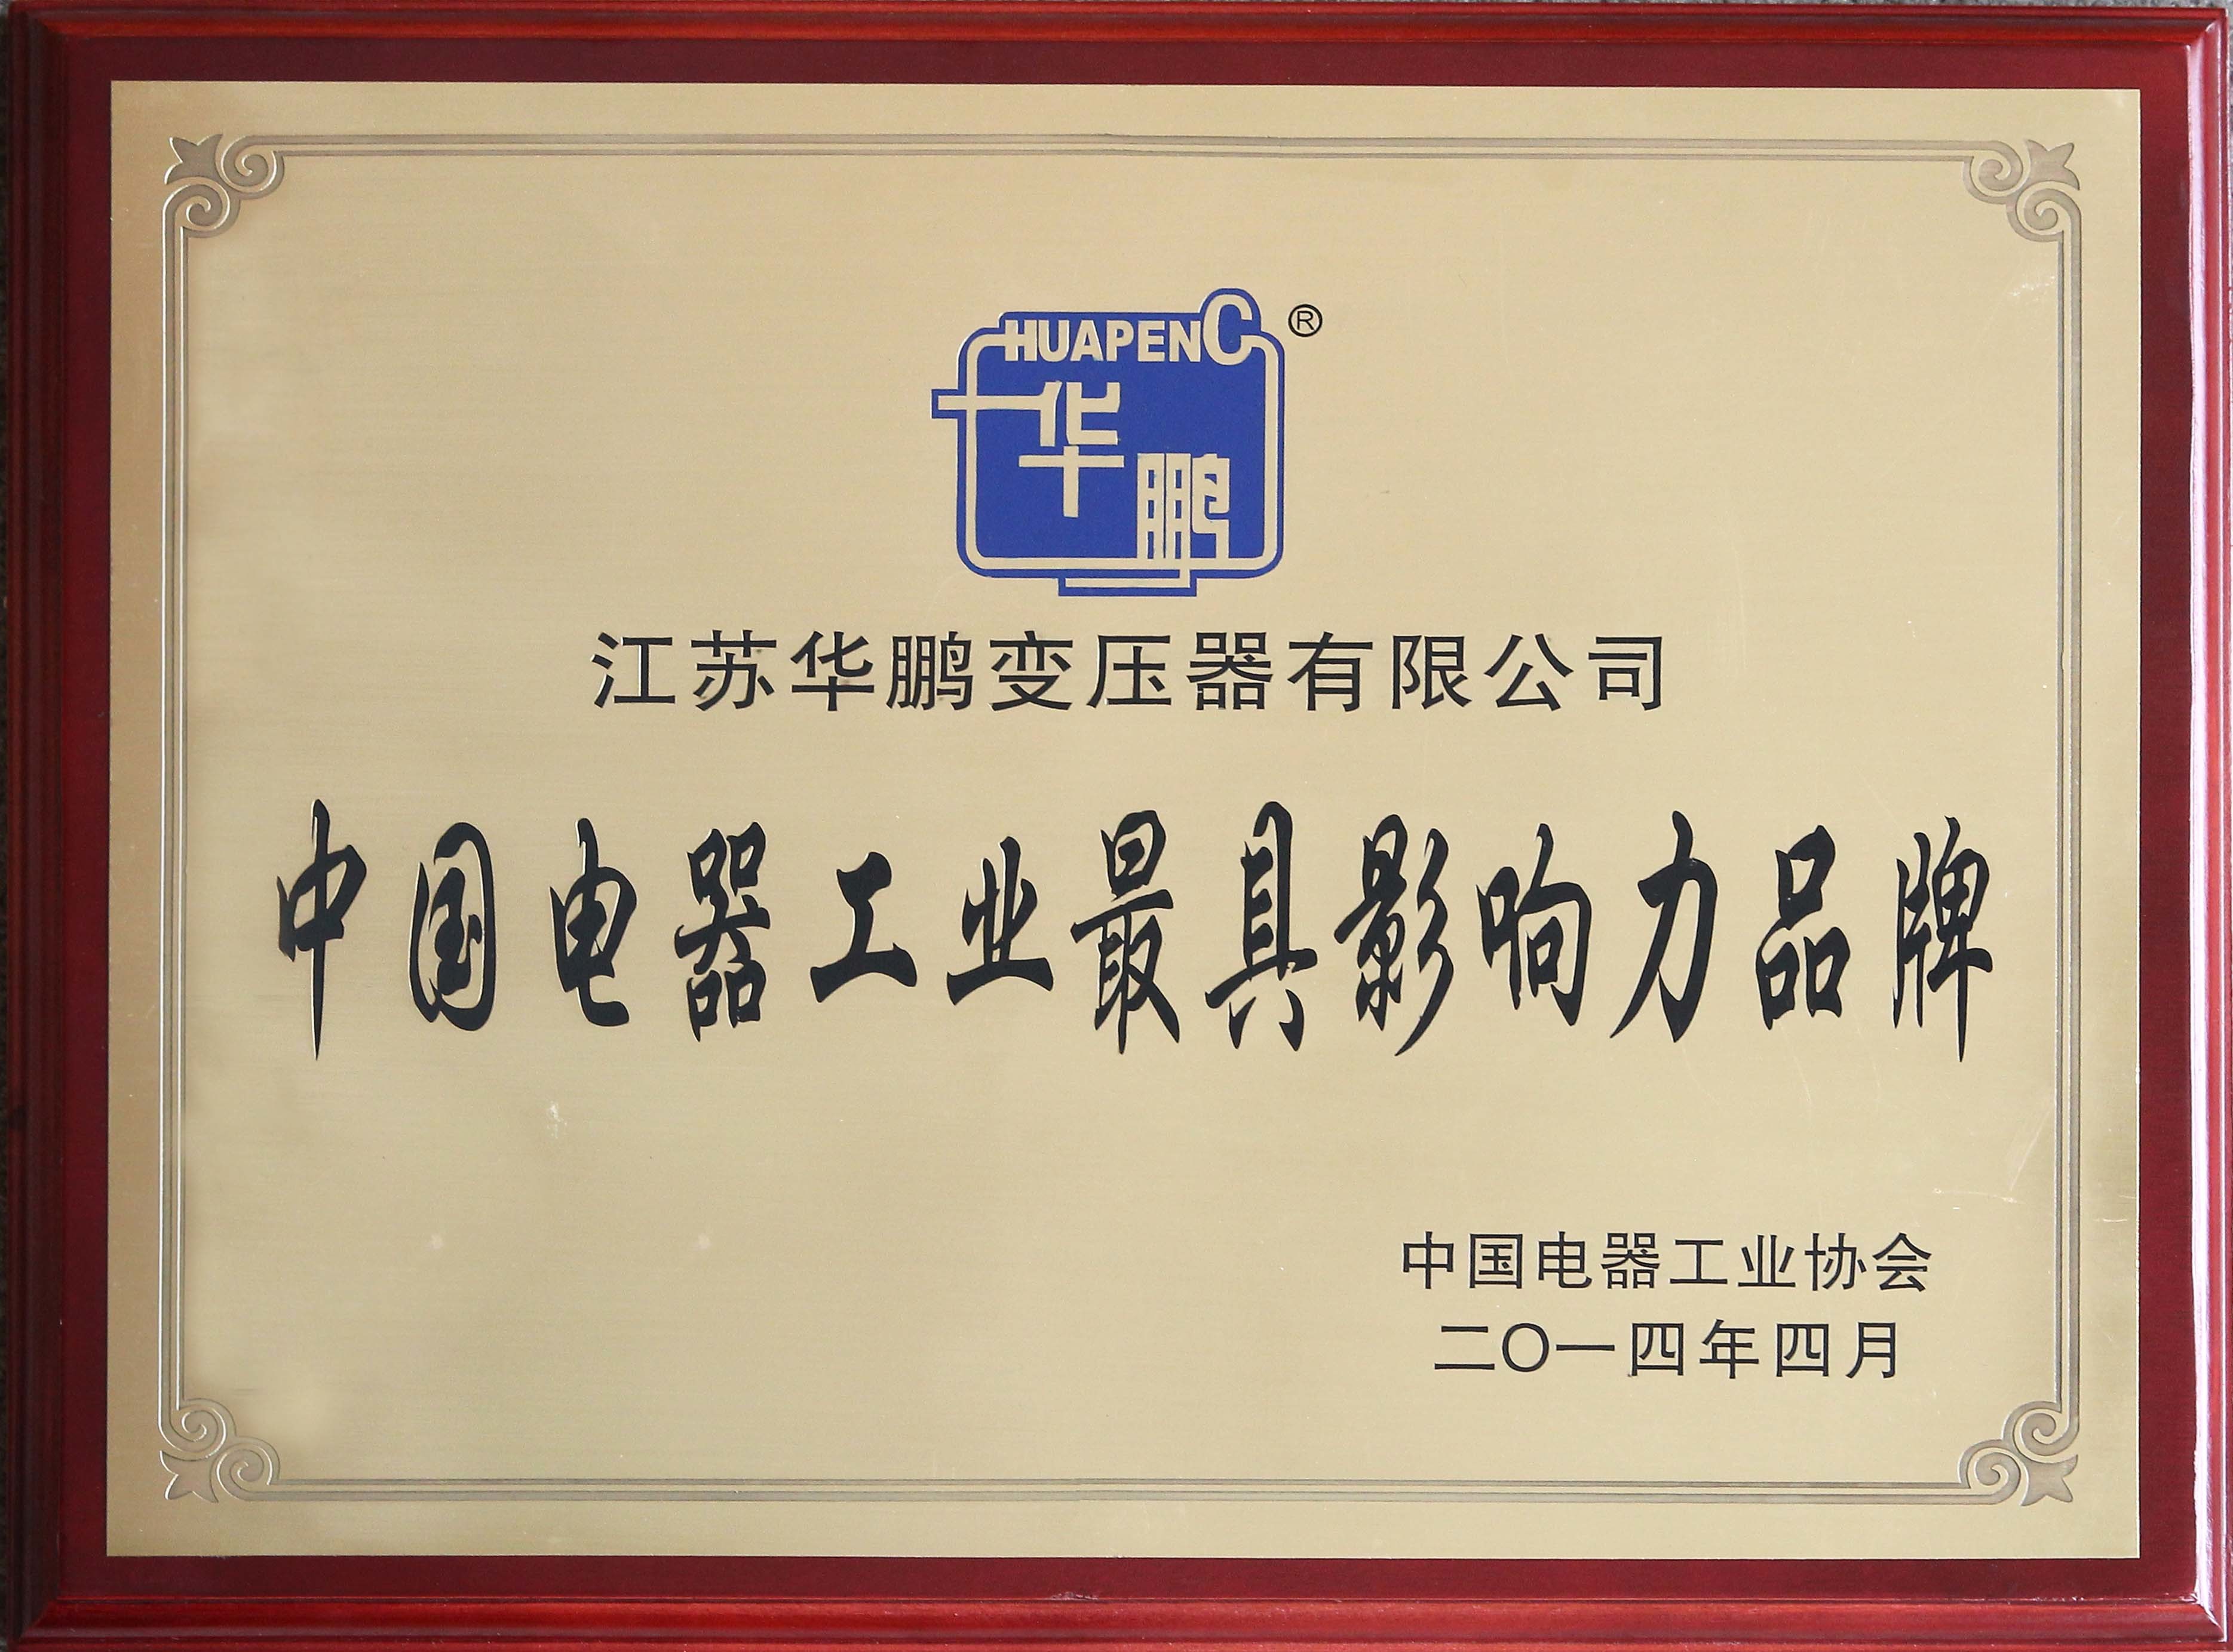 The Most Influential Brand in China Electrical Industry in 2014